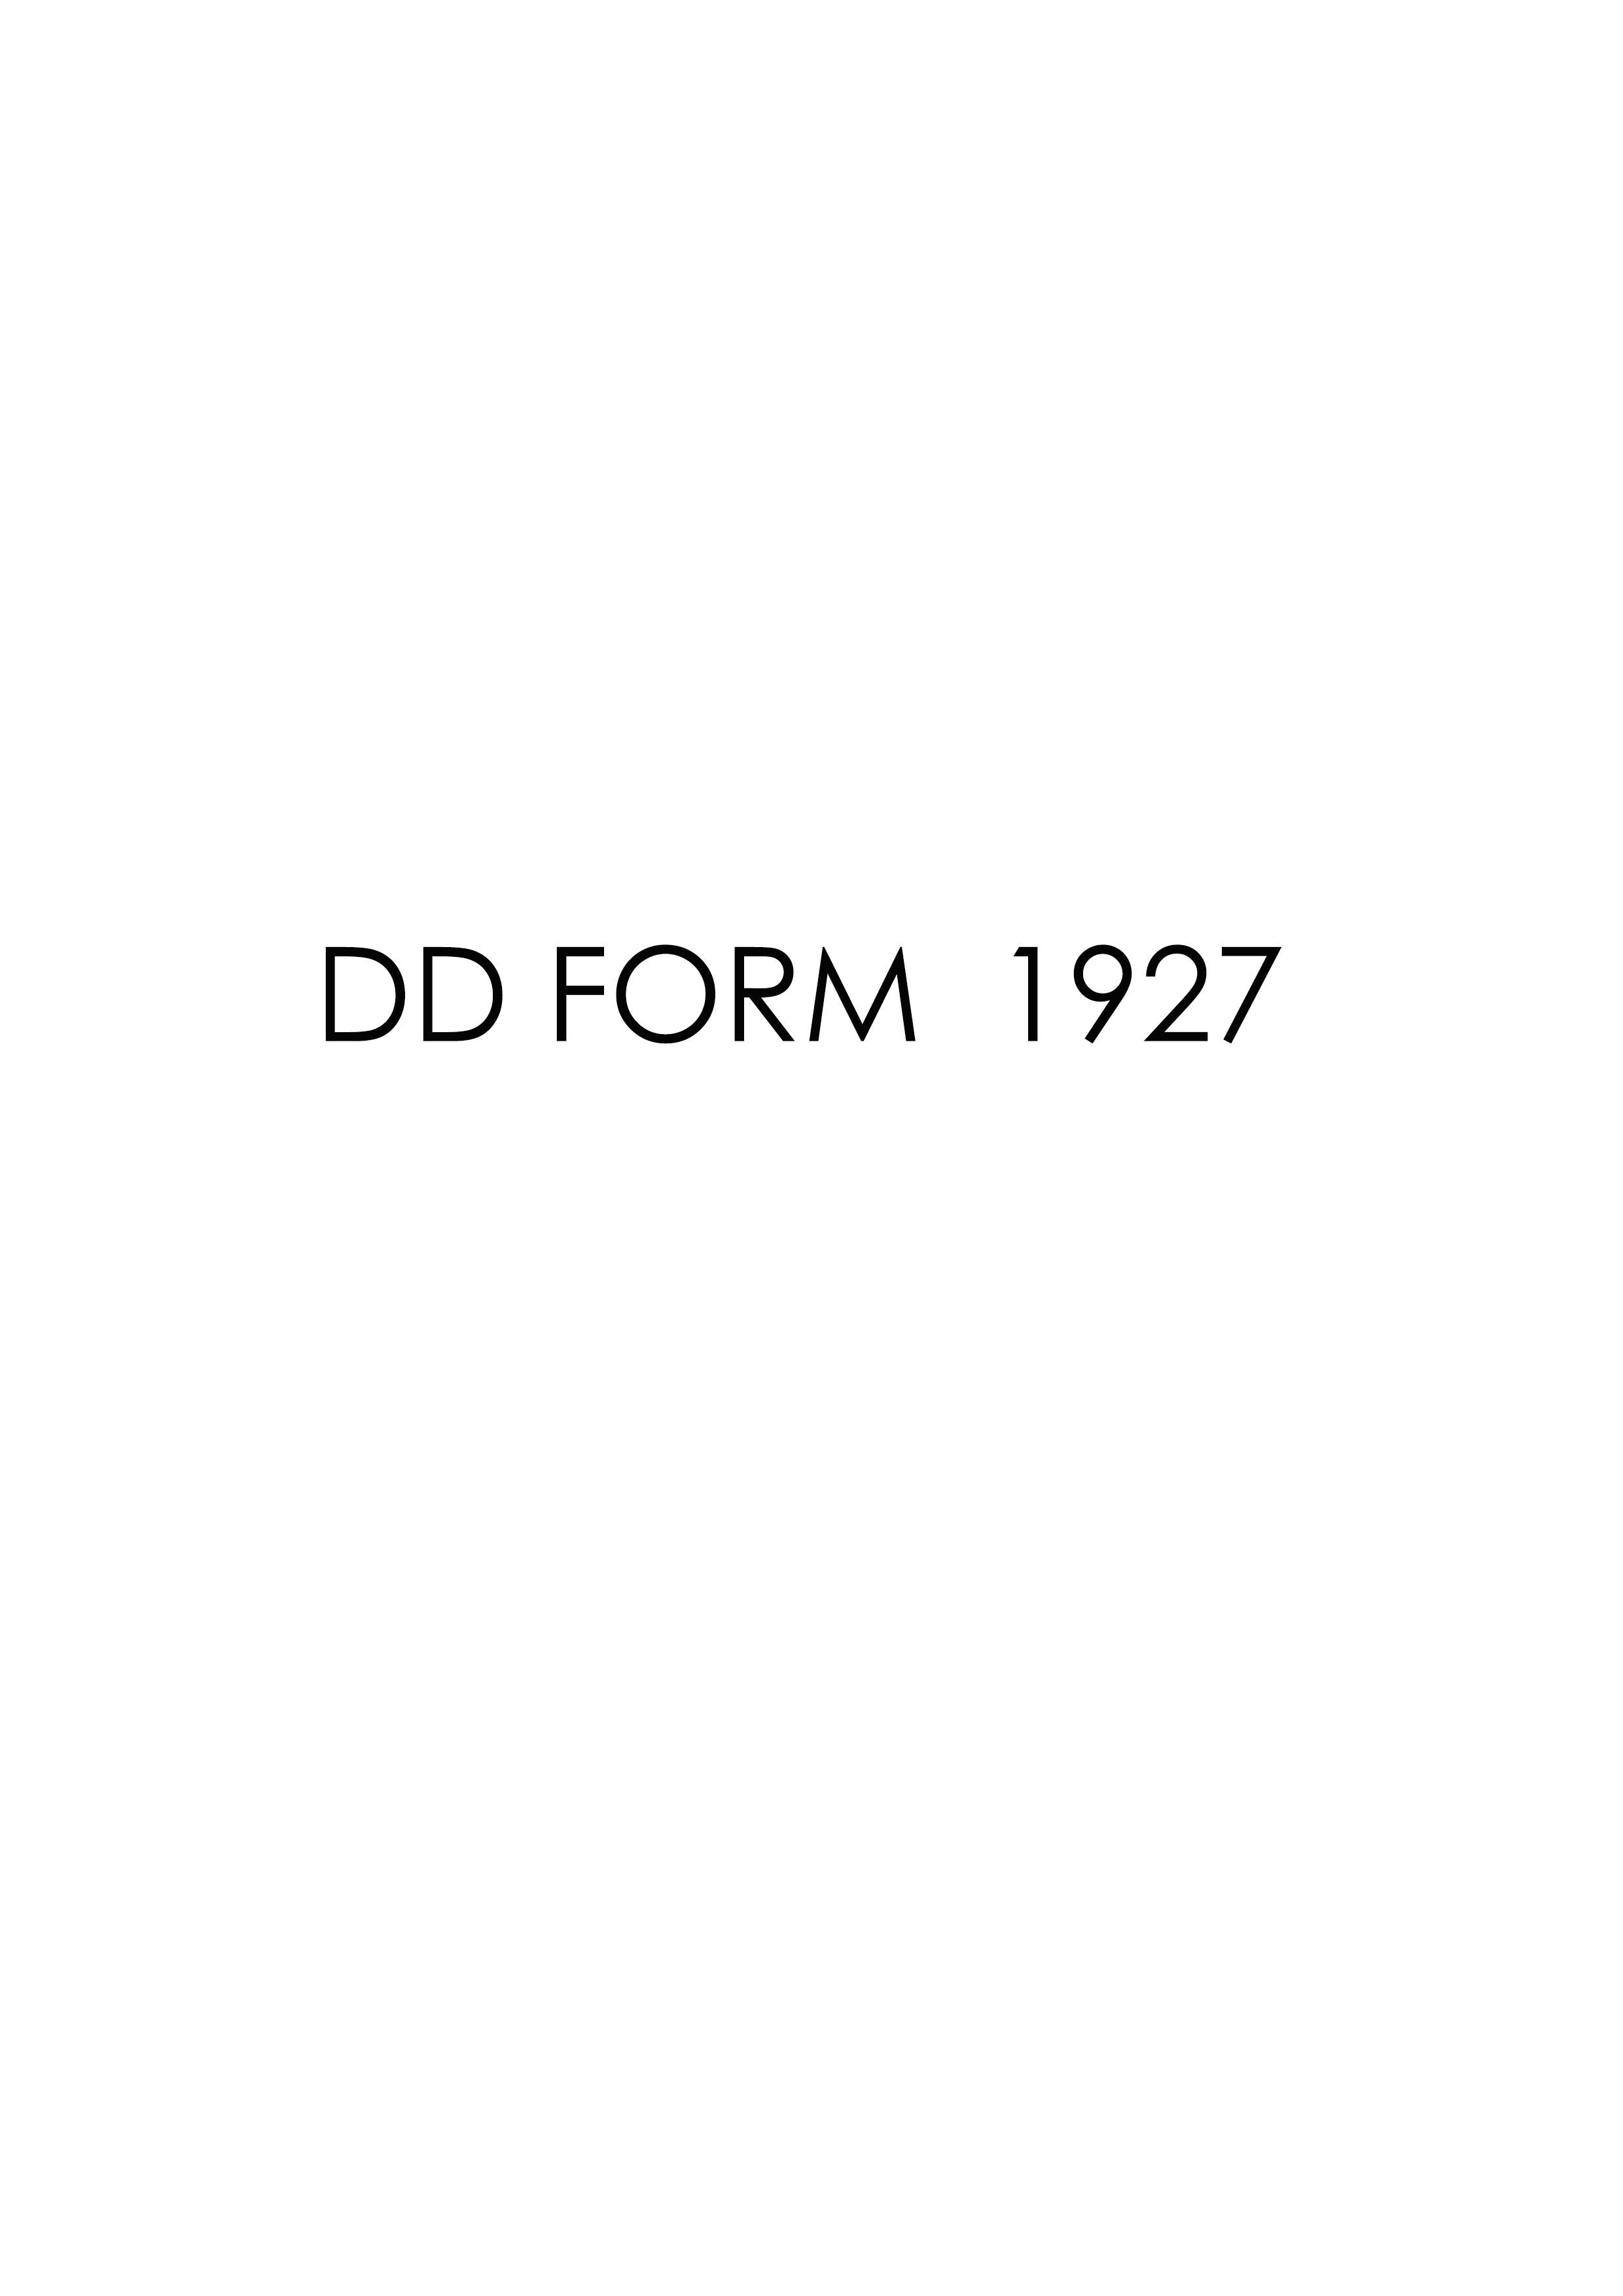 Download Fillable dd Form 1927